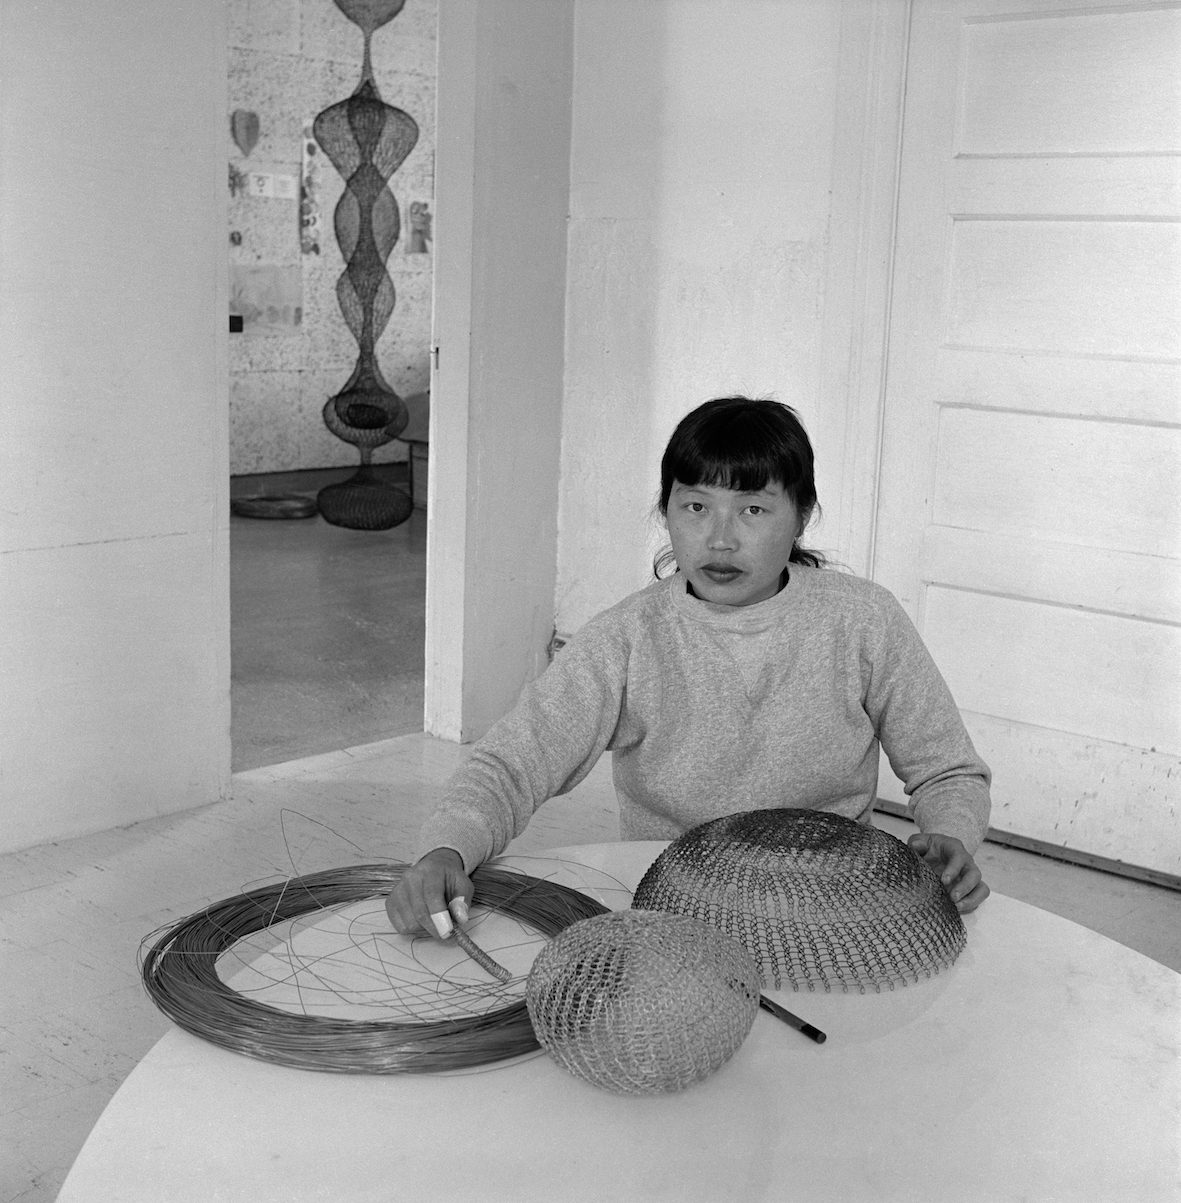 A young woman creating circular wire sculptures from large loops of wire. Asawa is sitting and stares. The background features a hanging looped wire sculpture in another room.